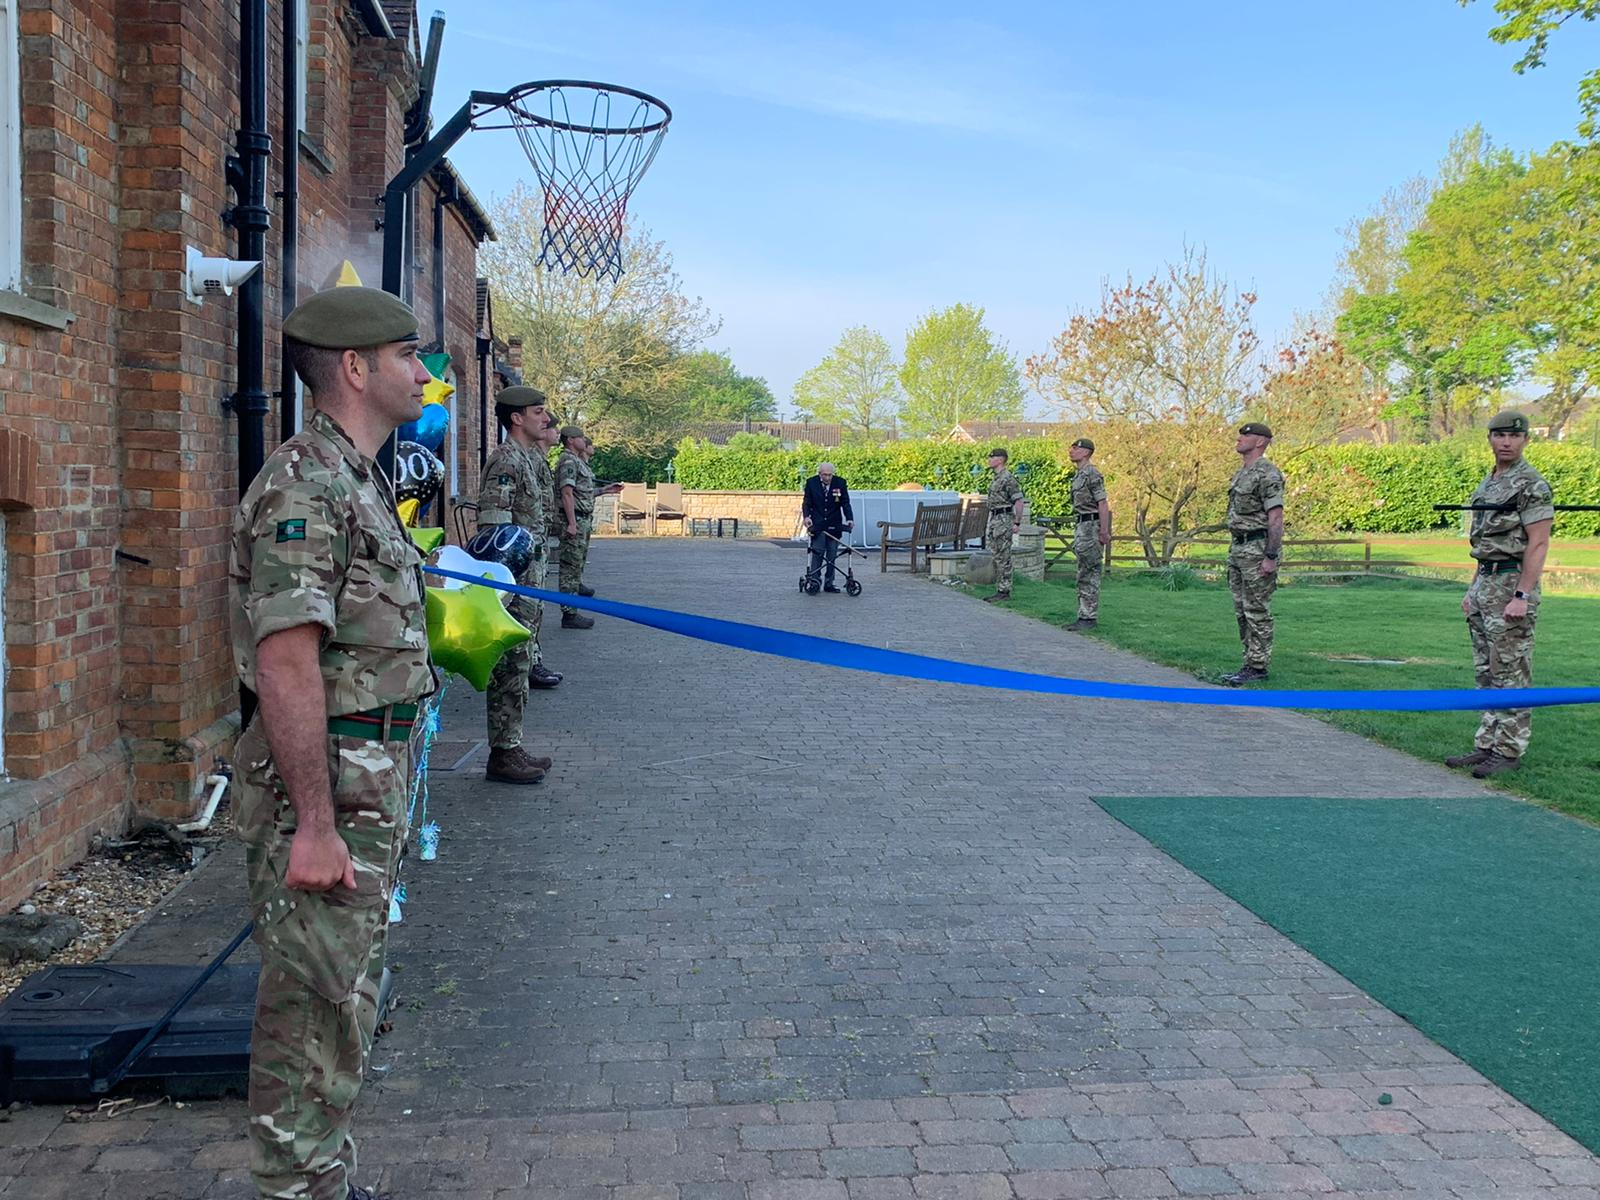 Troops Form Guard Of Honour As Captain Tom Moore Completes His £13M Walk